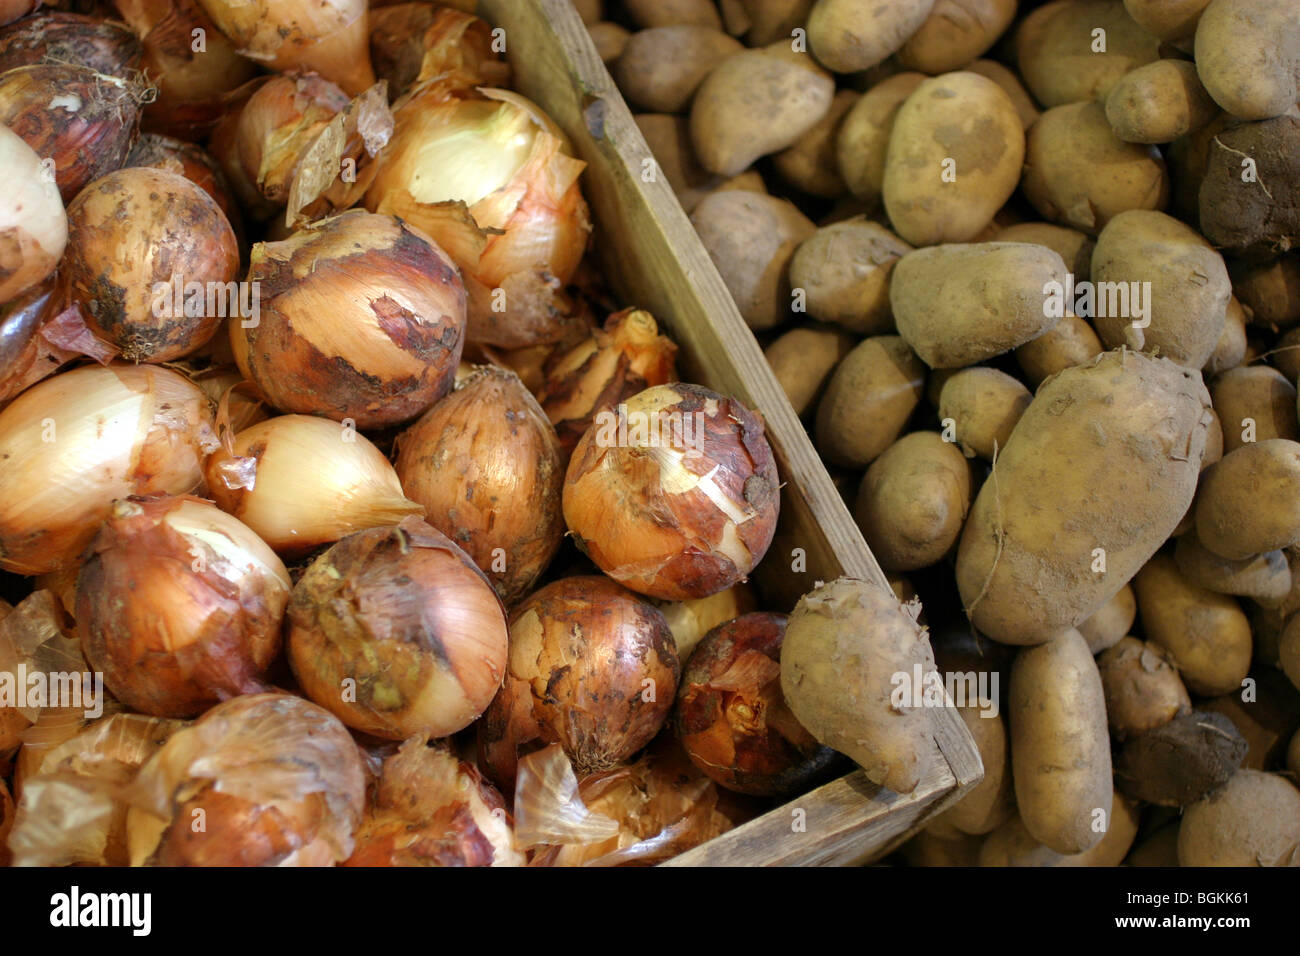 Organic Onions and Potatoes at a Farmers Market Stock Photo